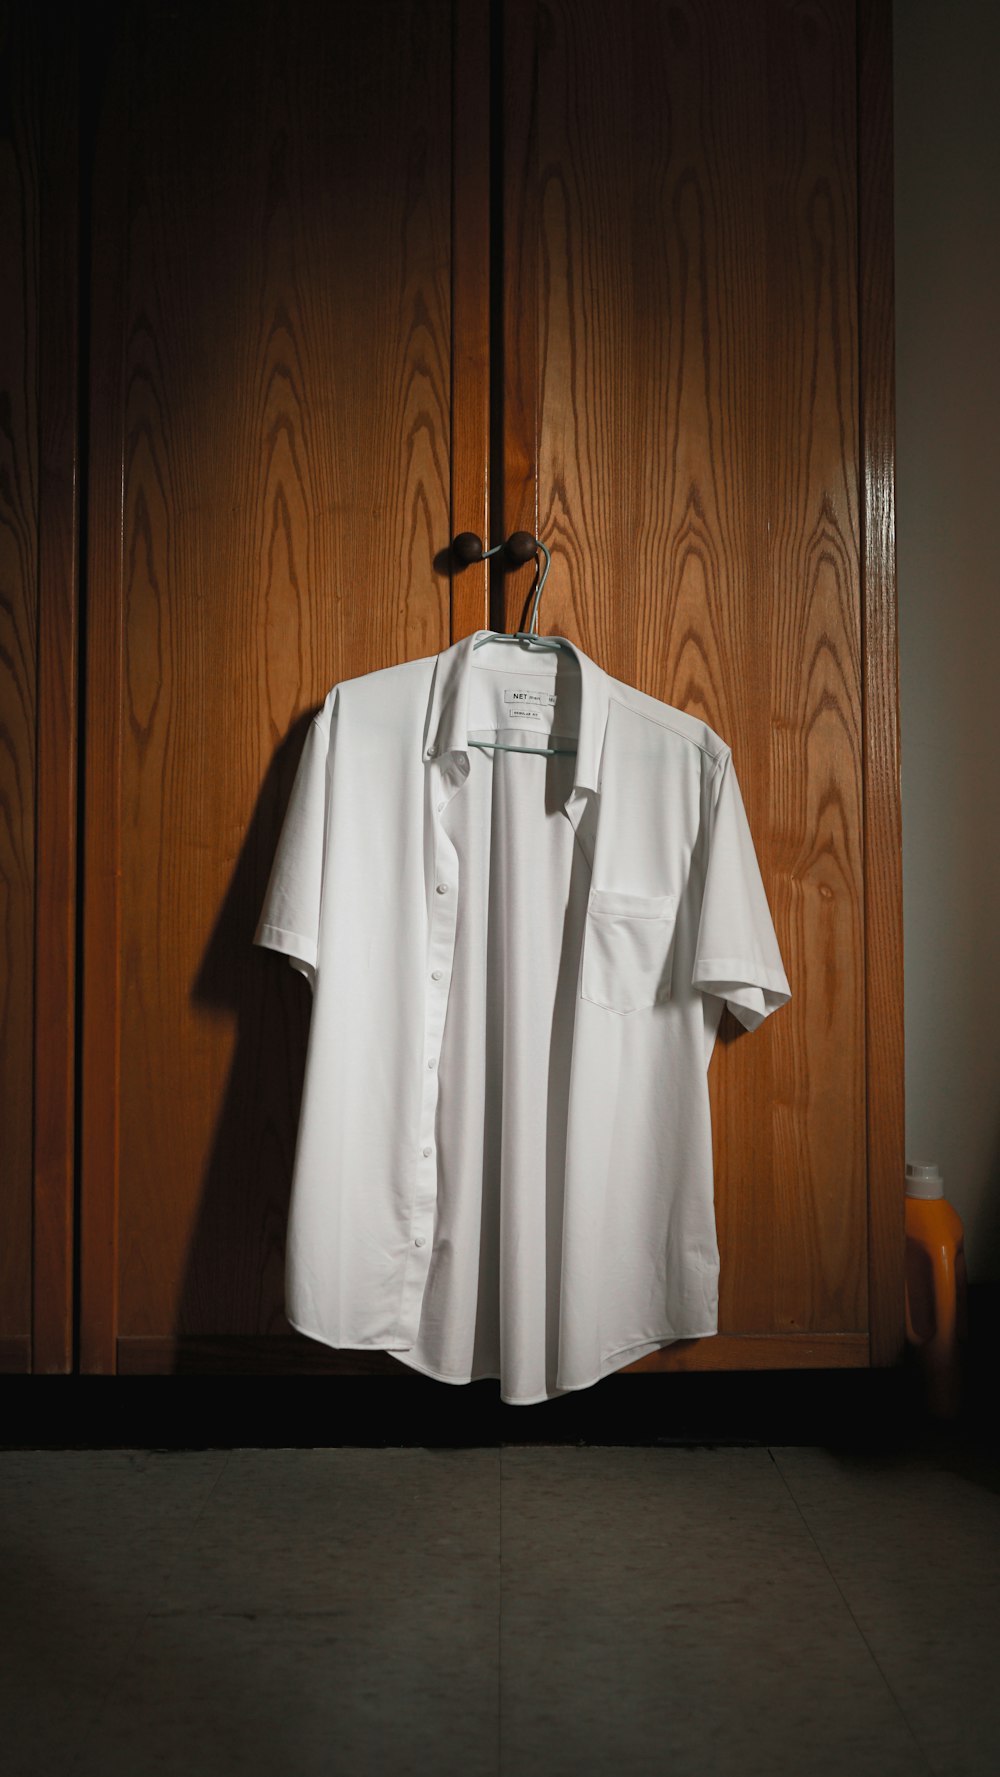 white polo shirt hanged on brown wooden cabinet